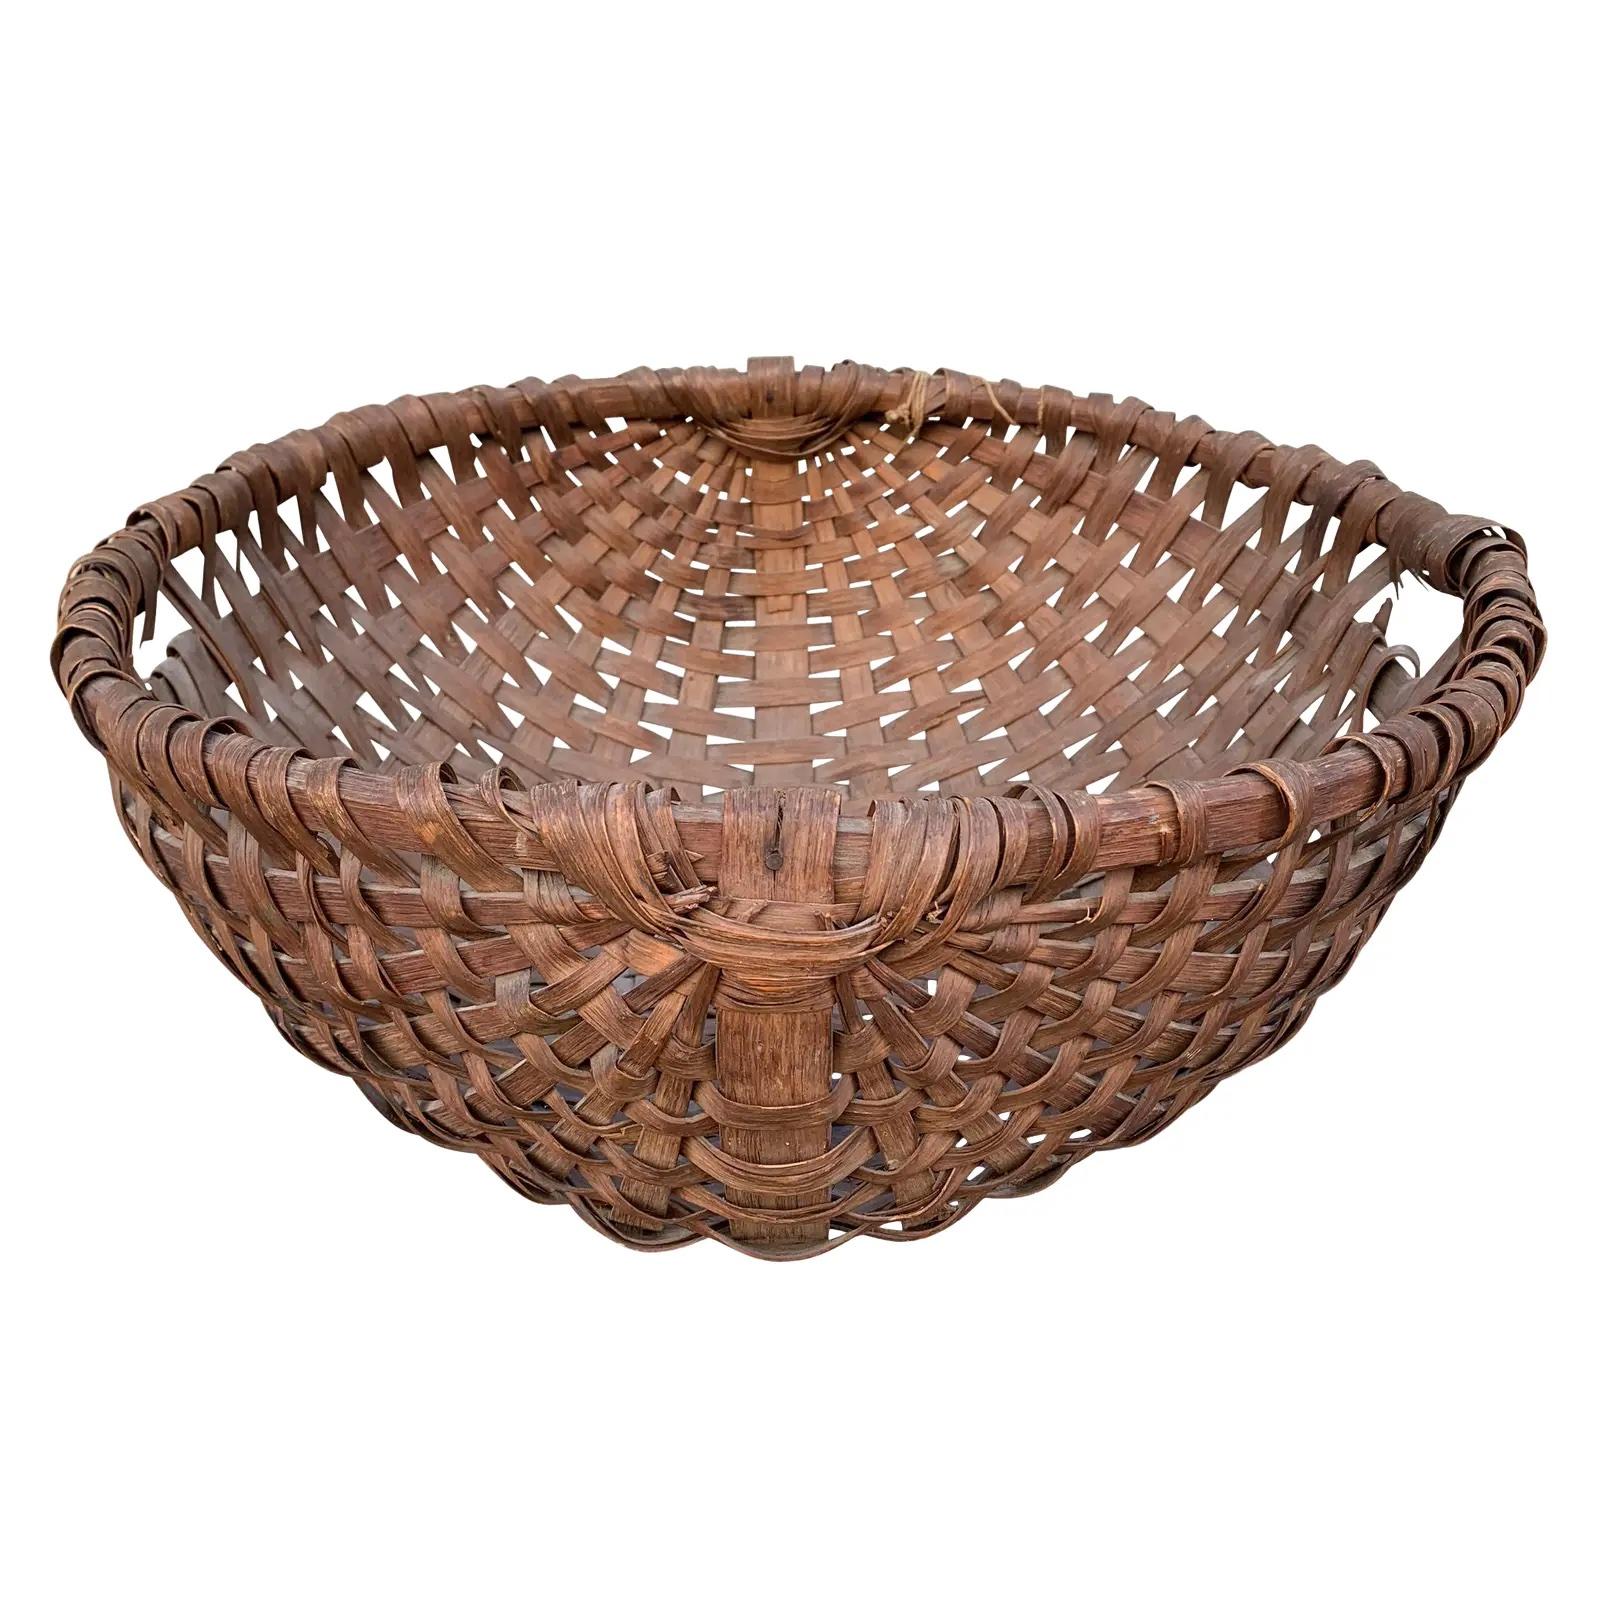 A wonderful and large 19th century American oak splint spale-form gathering basket with a bent wood ring and a handle on each side. Spale baskets were traditionally used for gathering root vegetables from the garden.